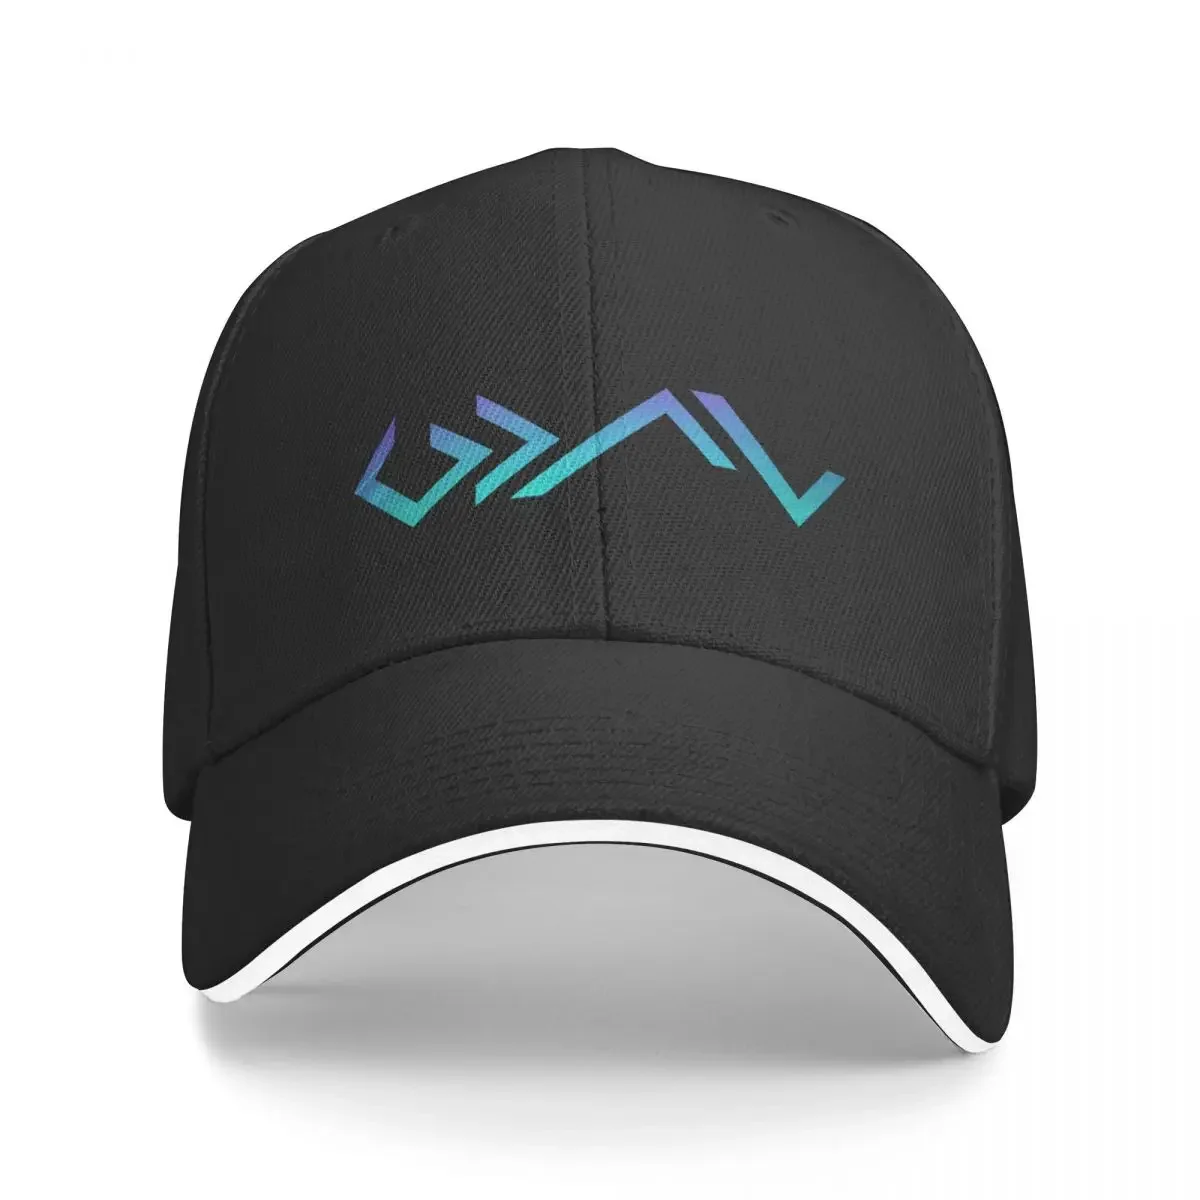 

God is Greater Than The Highs and Lows, Modern, Symbols, Christian, Teal Baseball Cap tea Hat Golf Ladies Men's